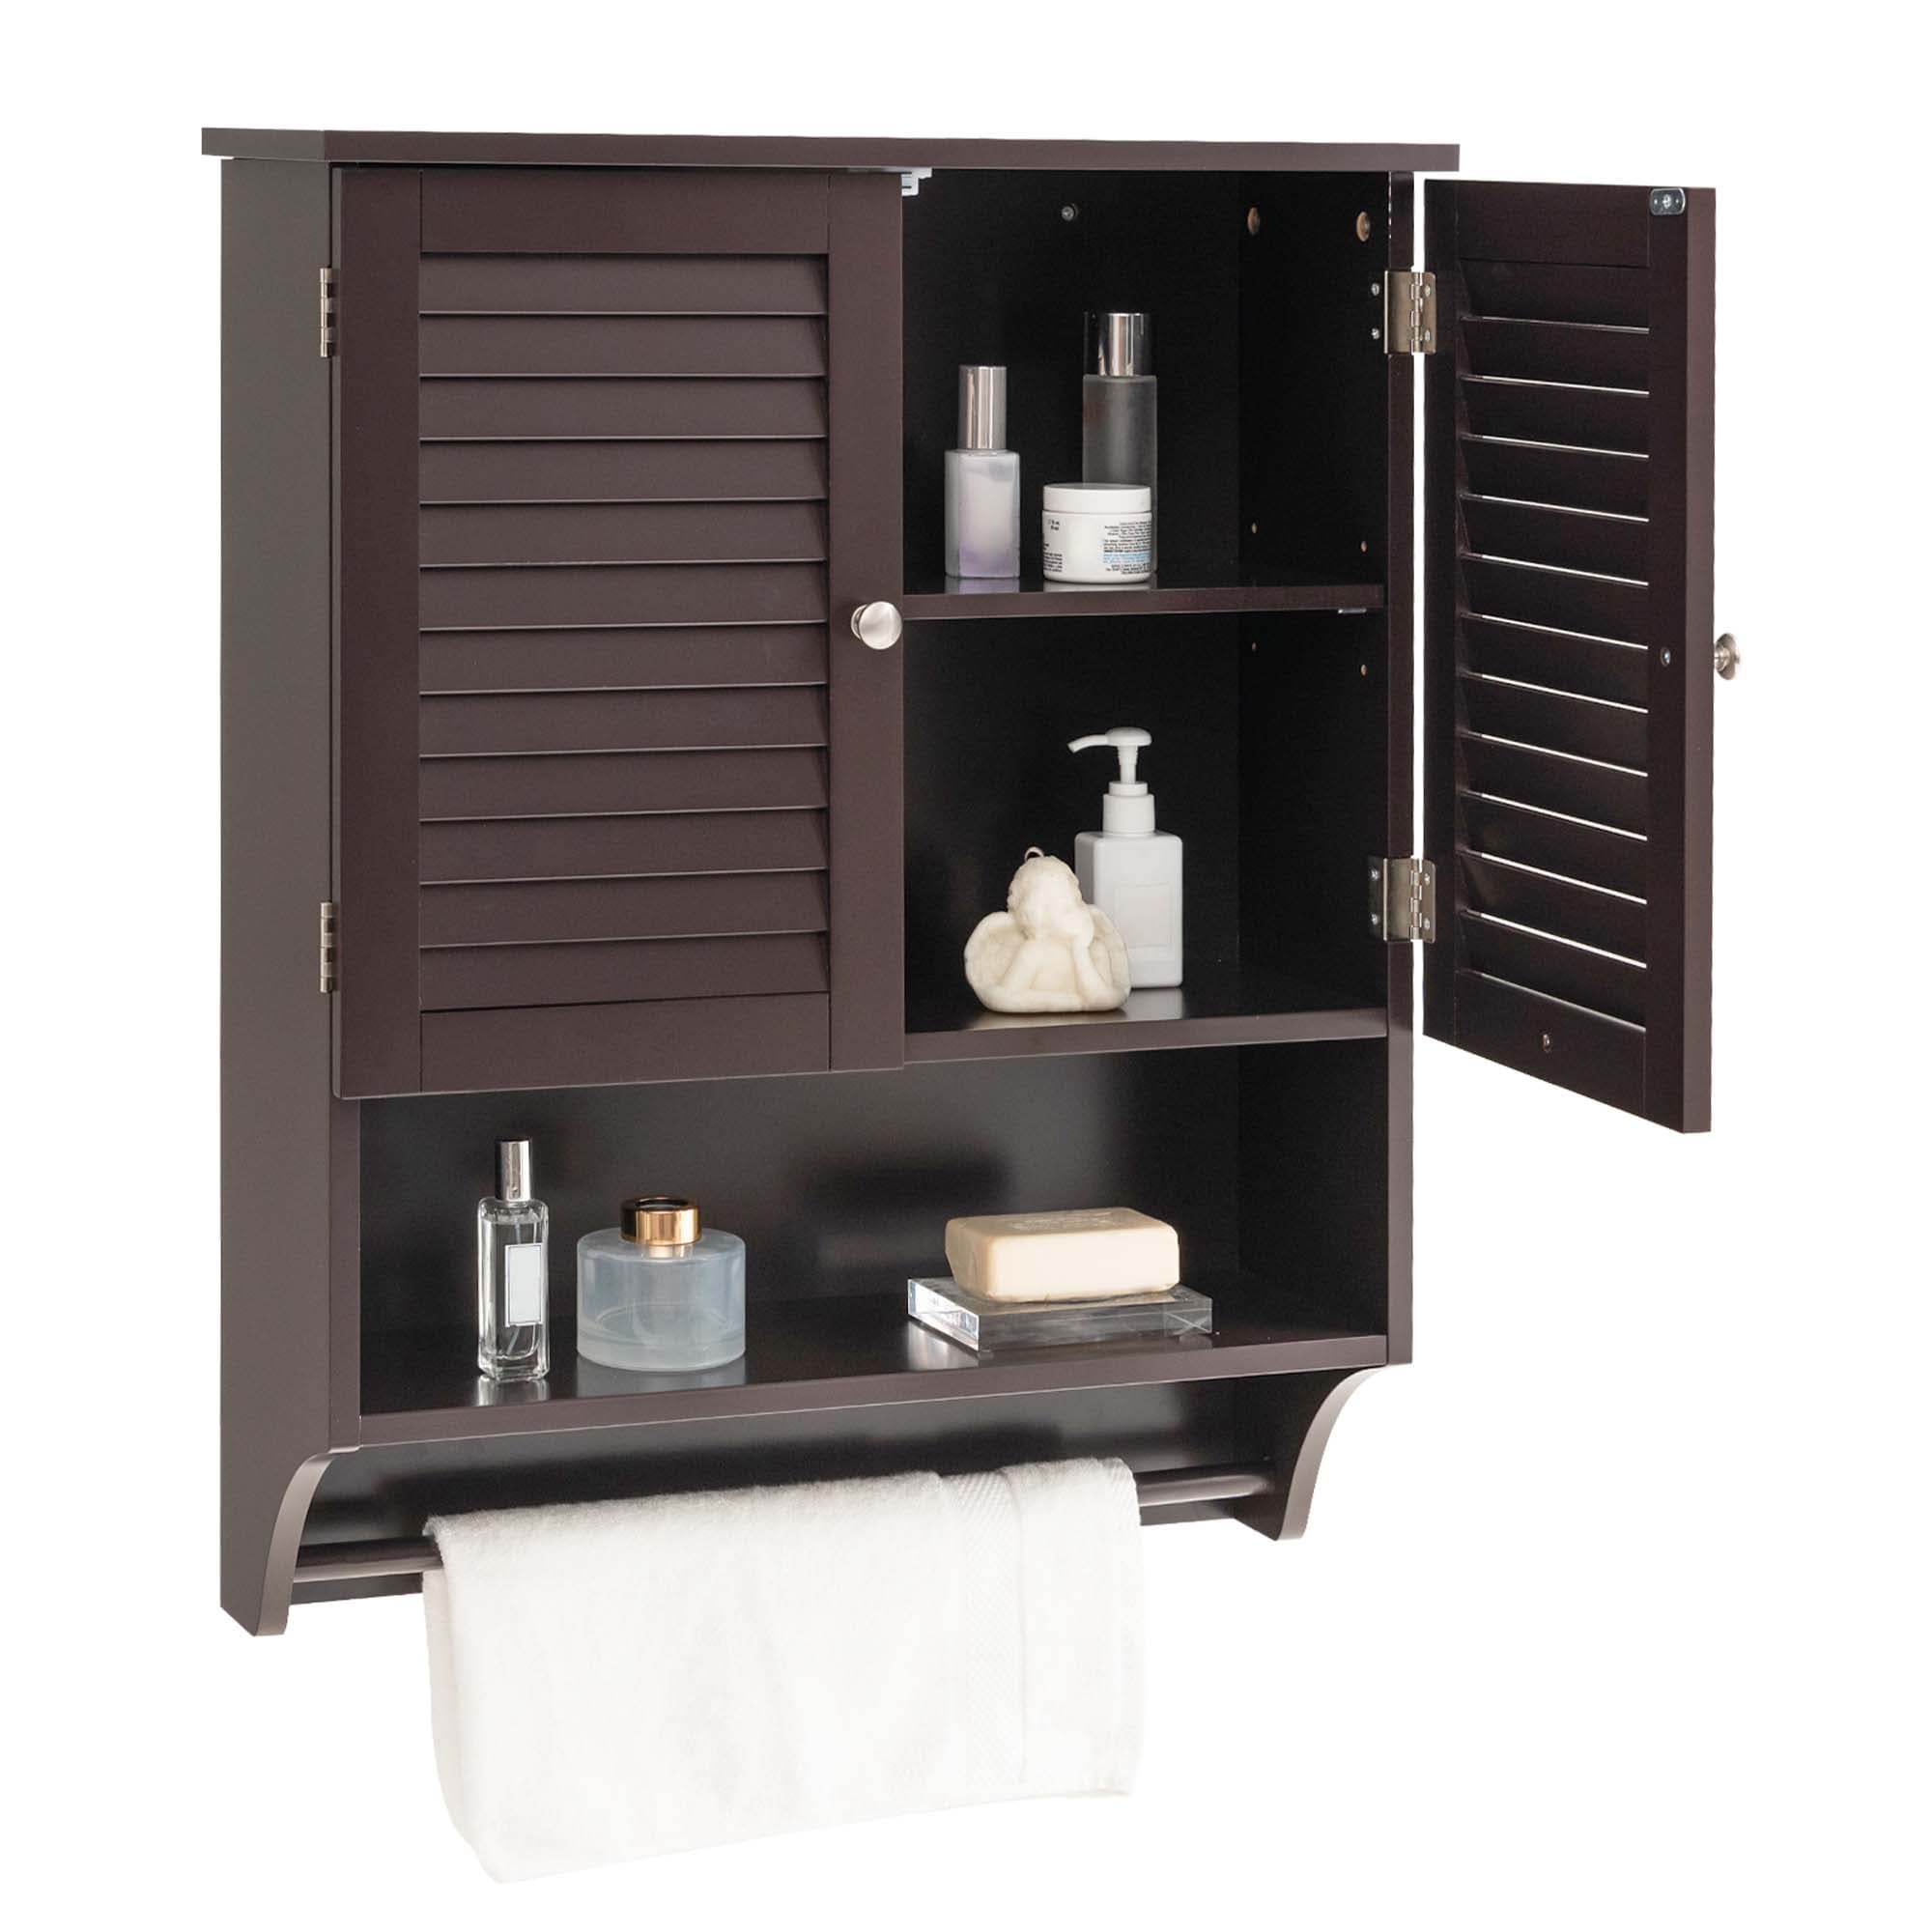 https://ak1.ostkcdn.com/images/products/is/images/direct/09a49137ac8db19a30af9f8886244c3cc9b15178/Costway-Bathroom-Wall-Mounted-Medicine-Cabinet-with-Louvered-Doors-%26.jpg